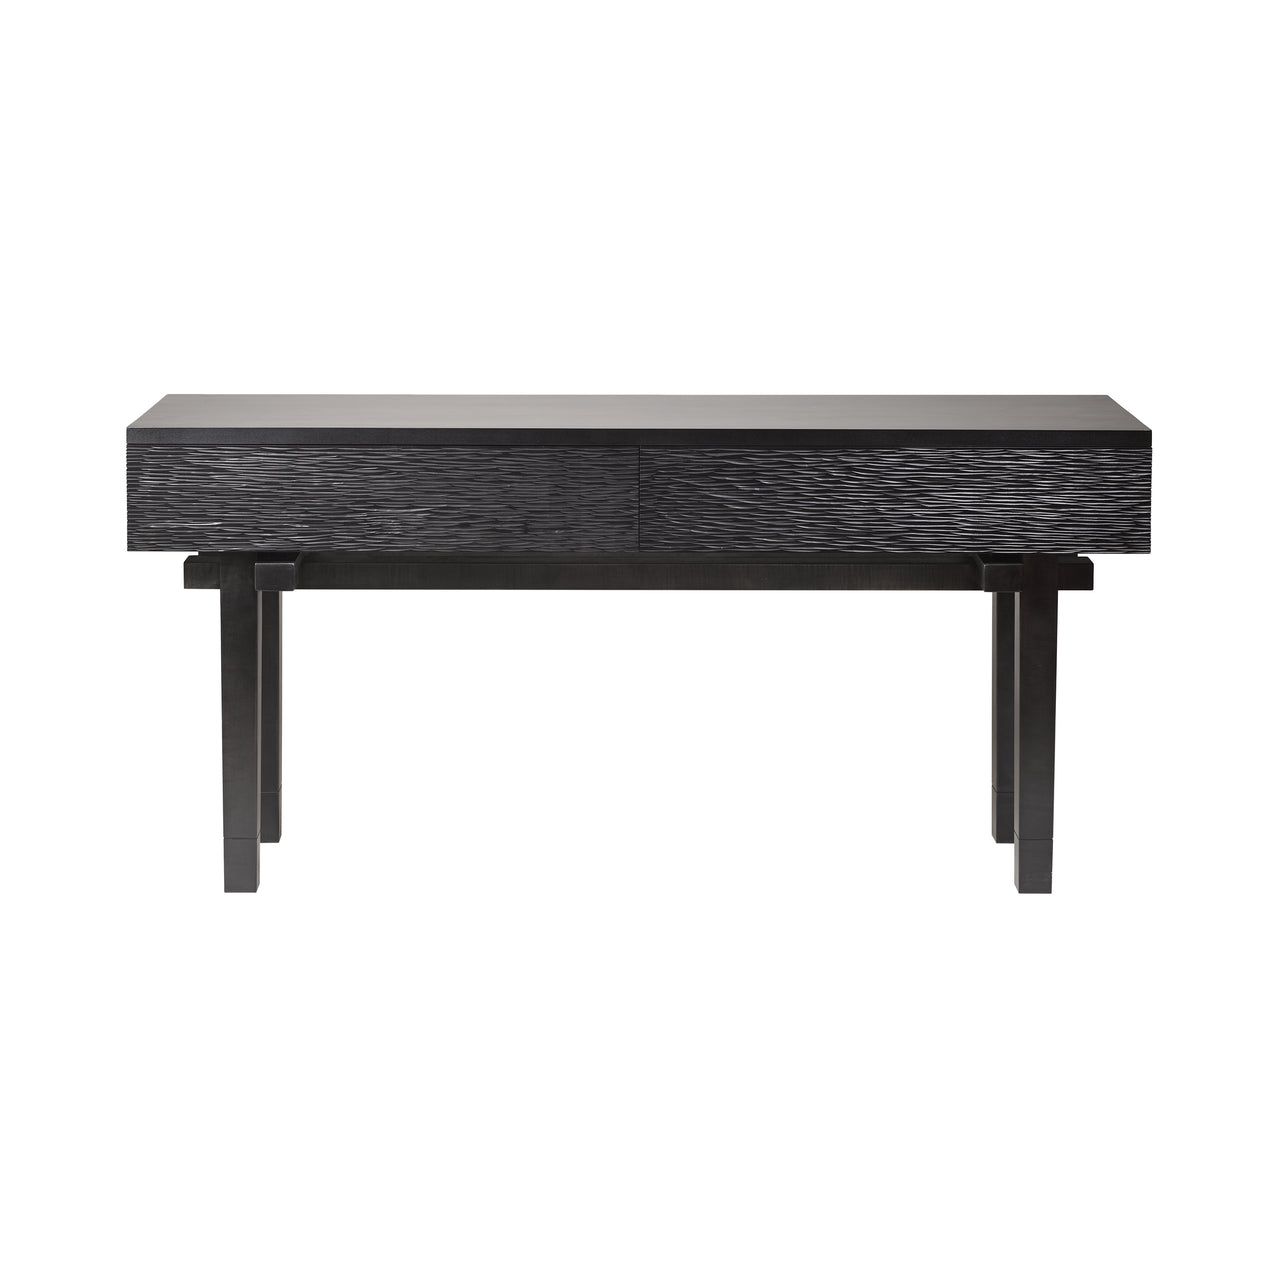 Kiam Console with Drawers: Black